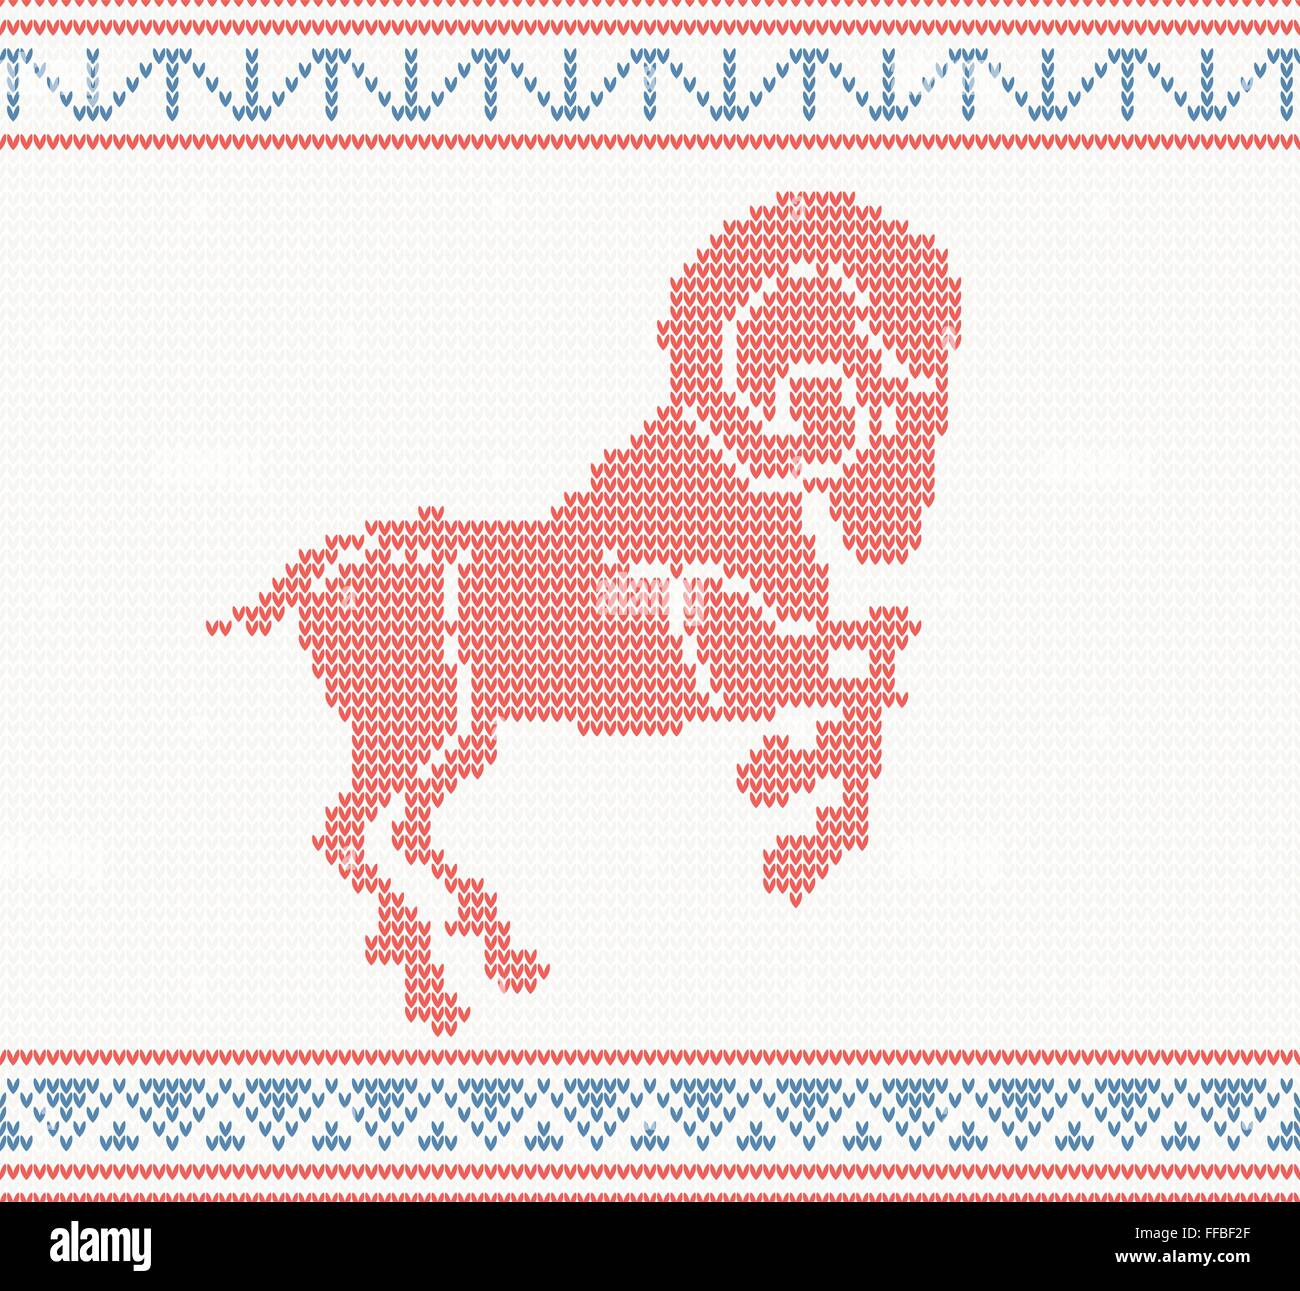 Red knitted pattern with sheep or goat. seamless vector illustration Stock Vector